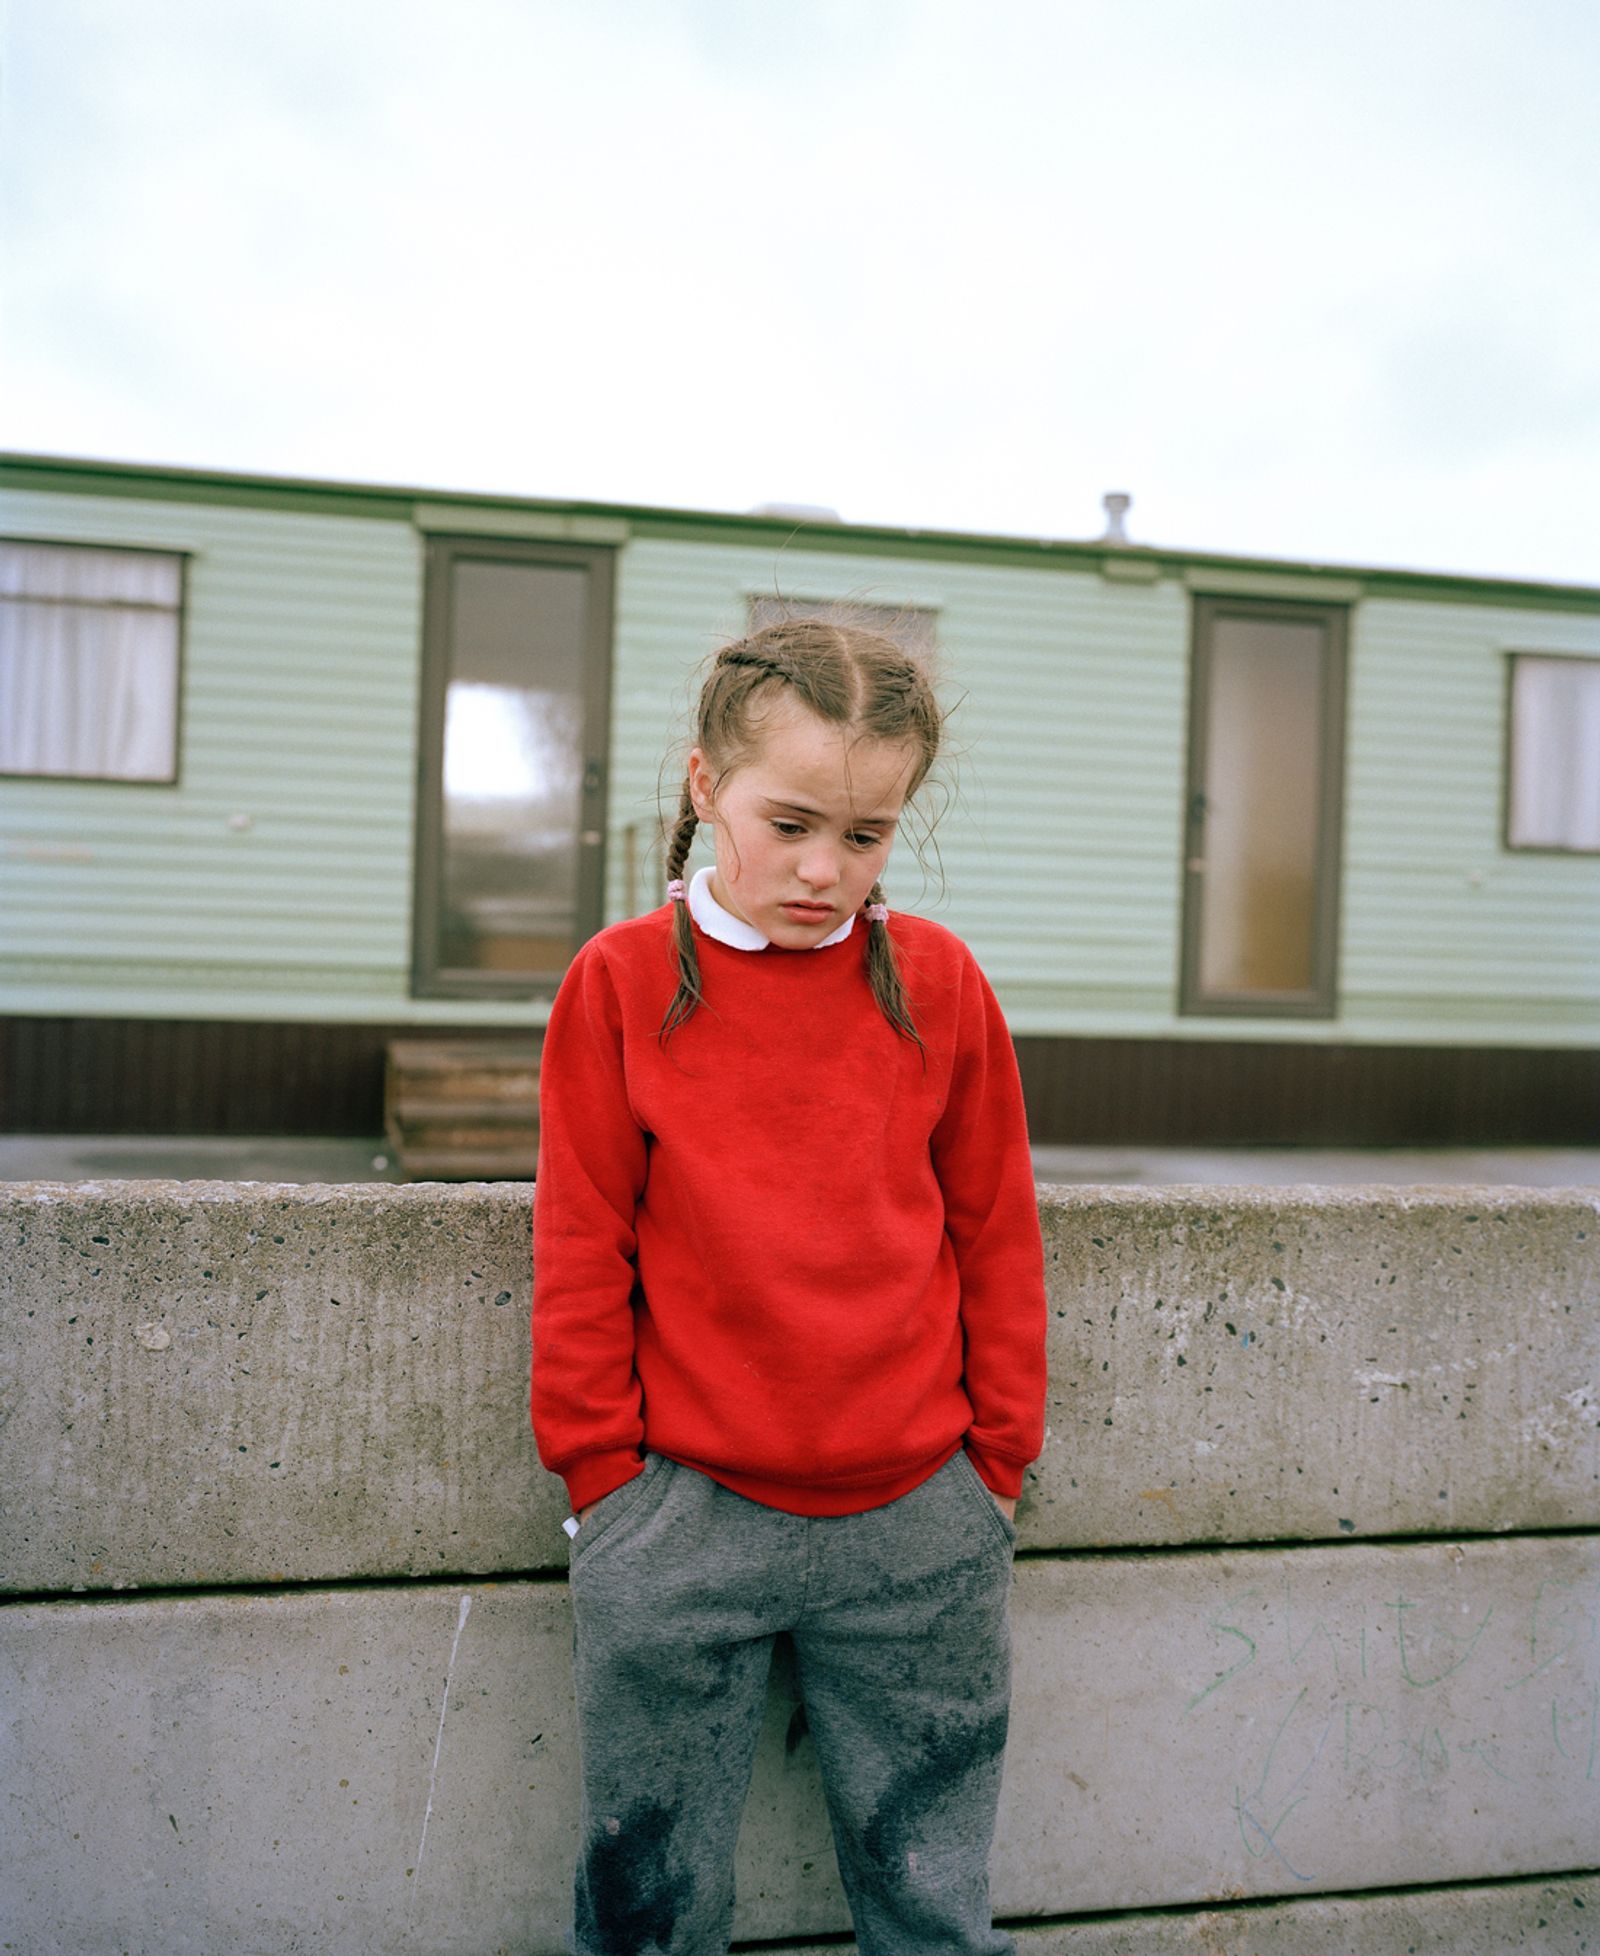 © Tamara Eckhardt - Image from the The Children of Carrowbrowne photography project